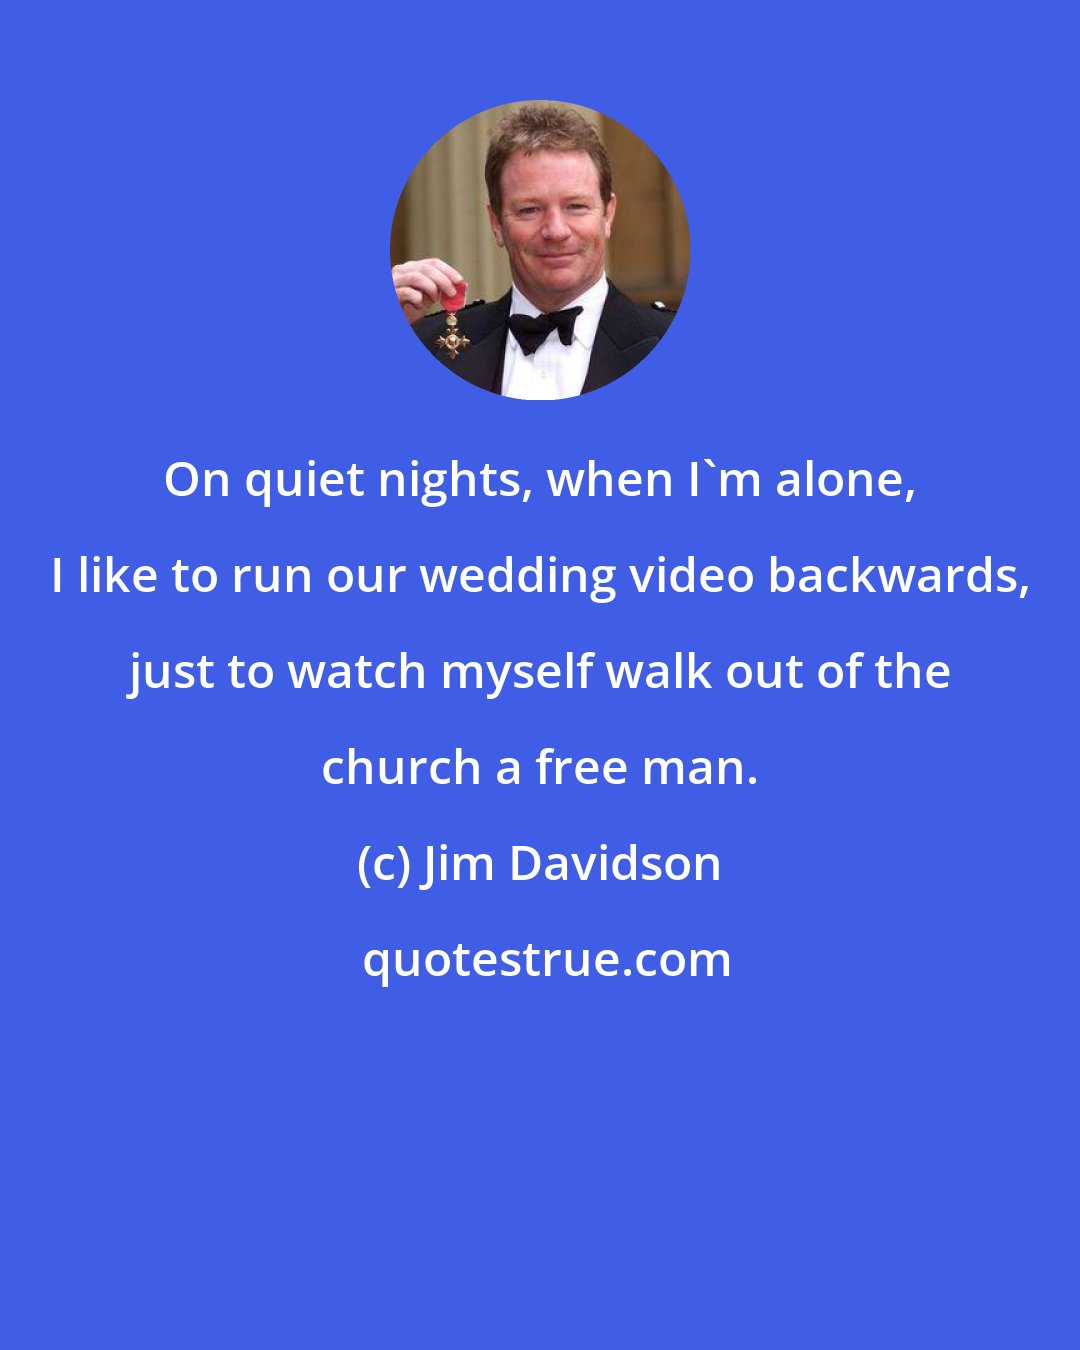 Jim Davidson: On quiet nights, when I'm alone, I like to run our wedding video backwards, just to watch myself walk out of the church a free man.